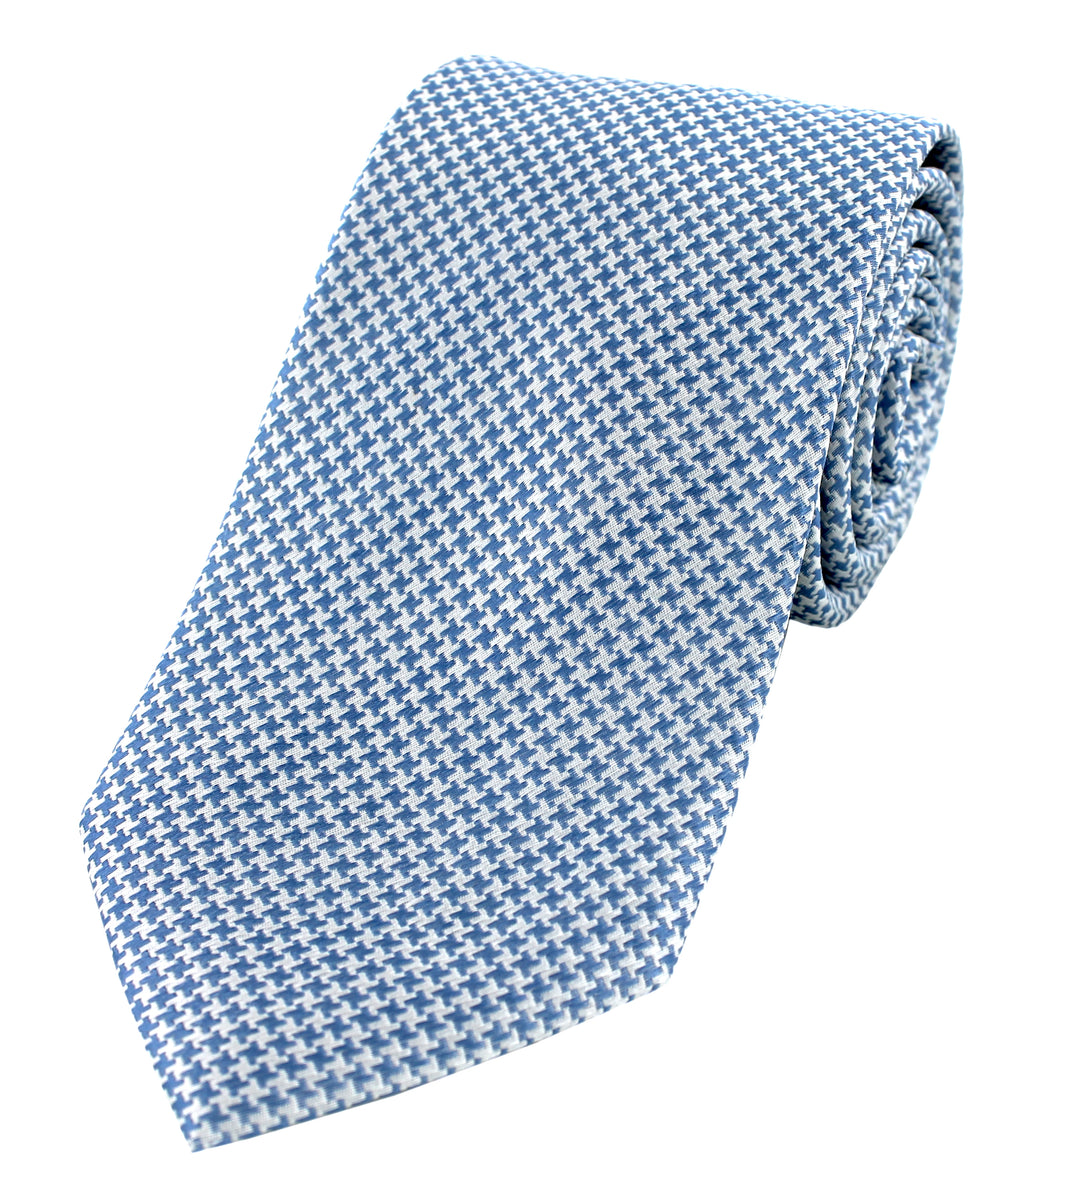 Sky blue tie with white patterns